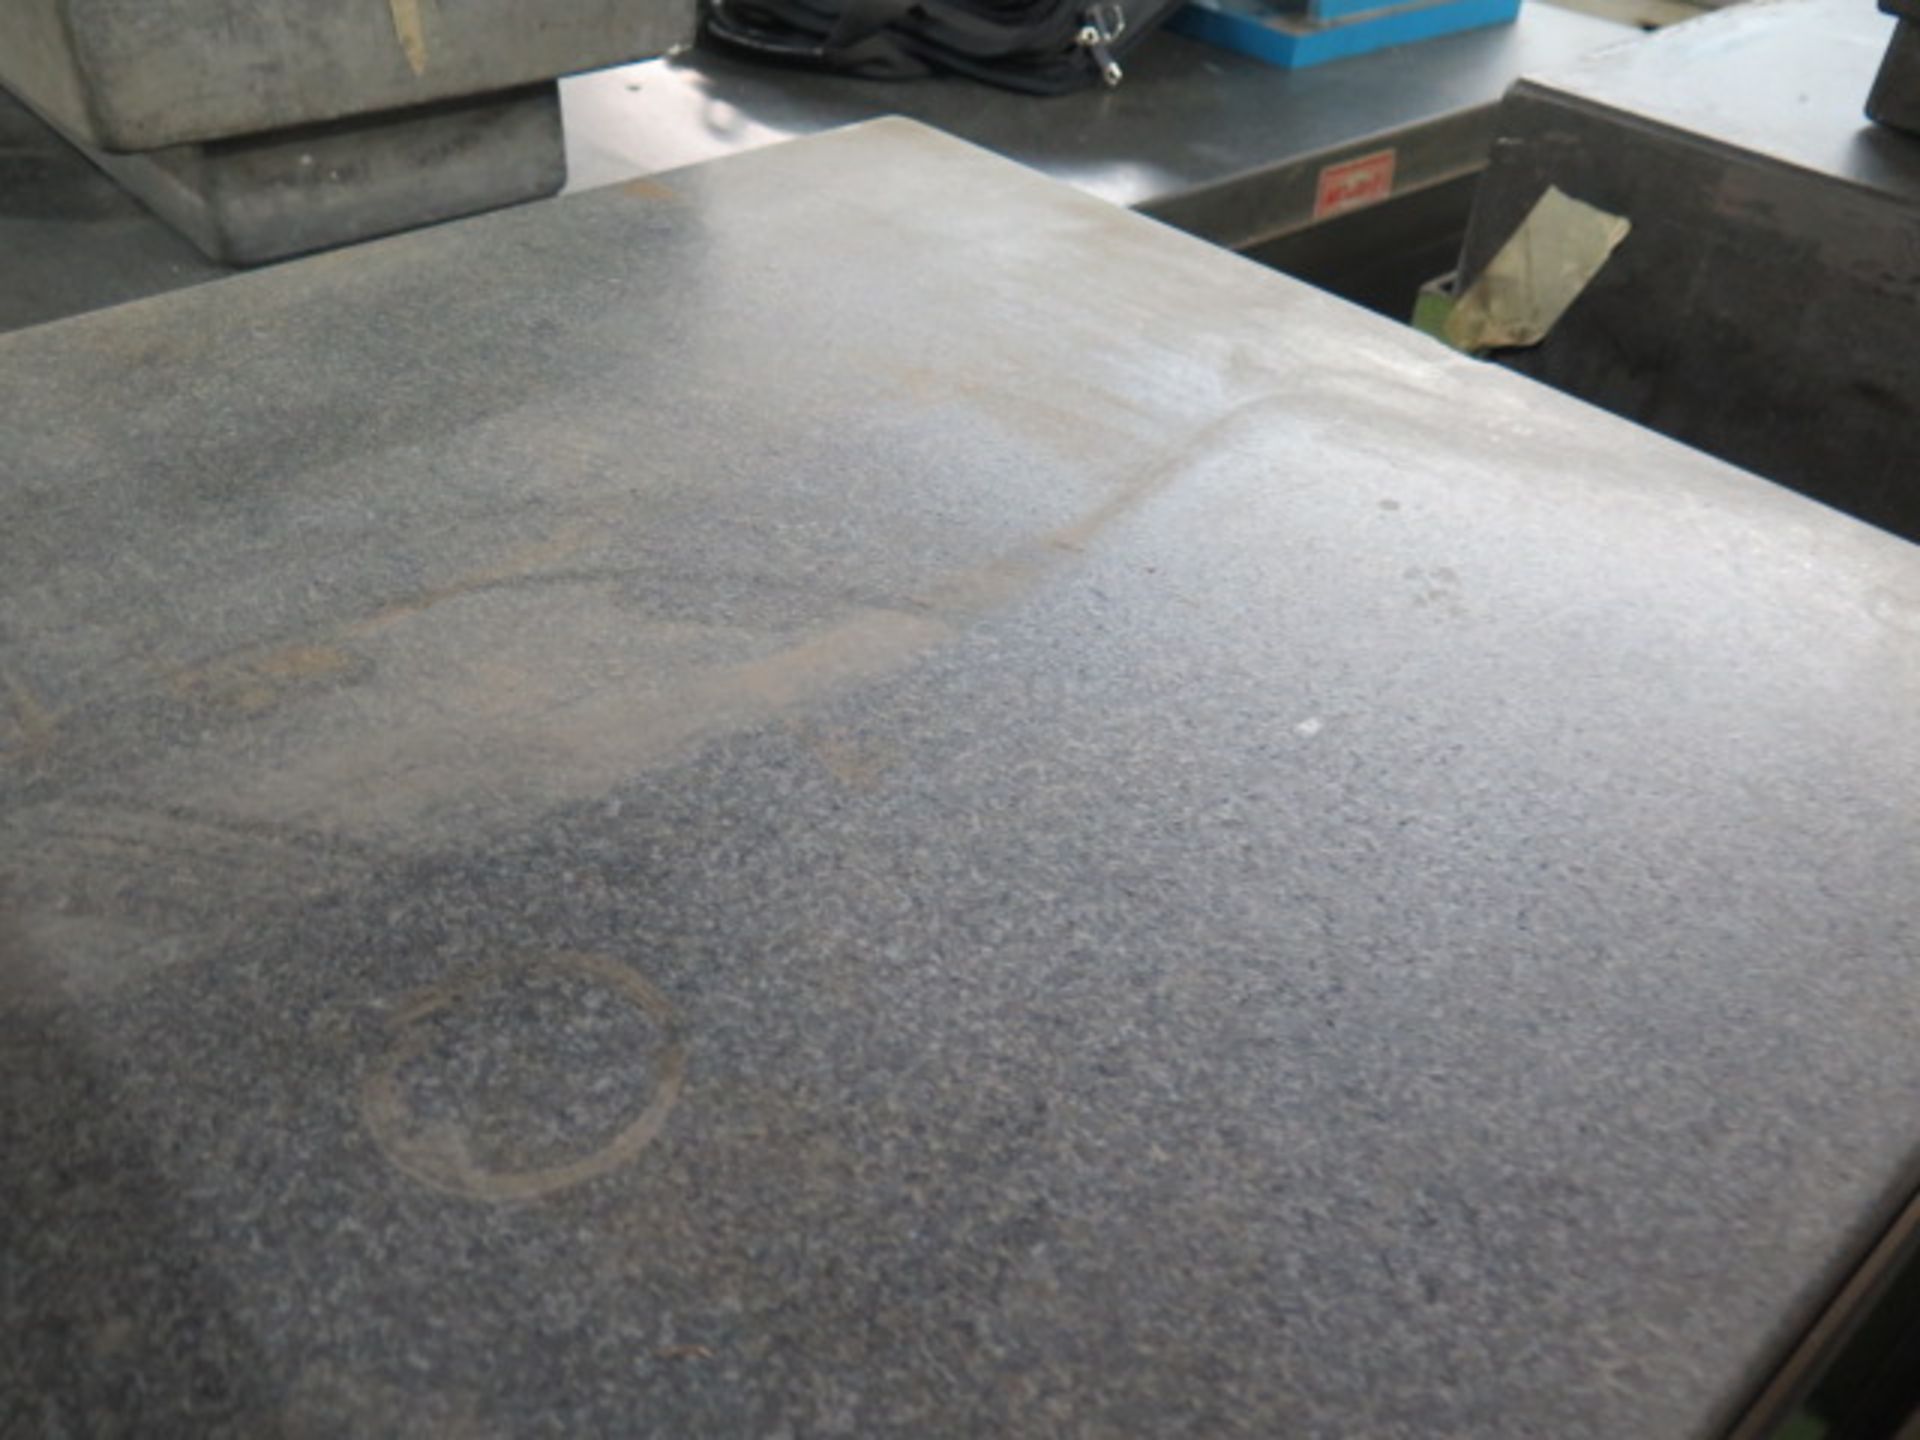 Standridge 25" x 36" x 5" 2-Ledge Granite Surface Plate w/ Rolling Stand (SOLD AS-IS - NO WARRANTY) - Image 3 of 5